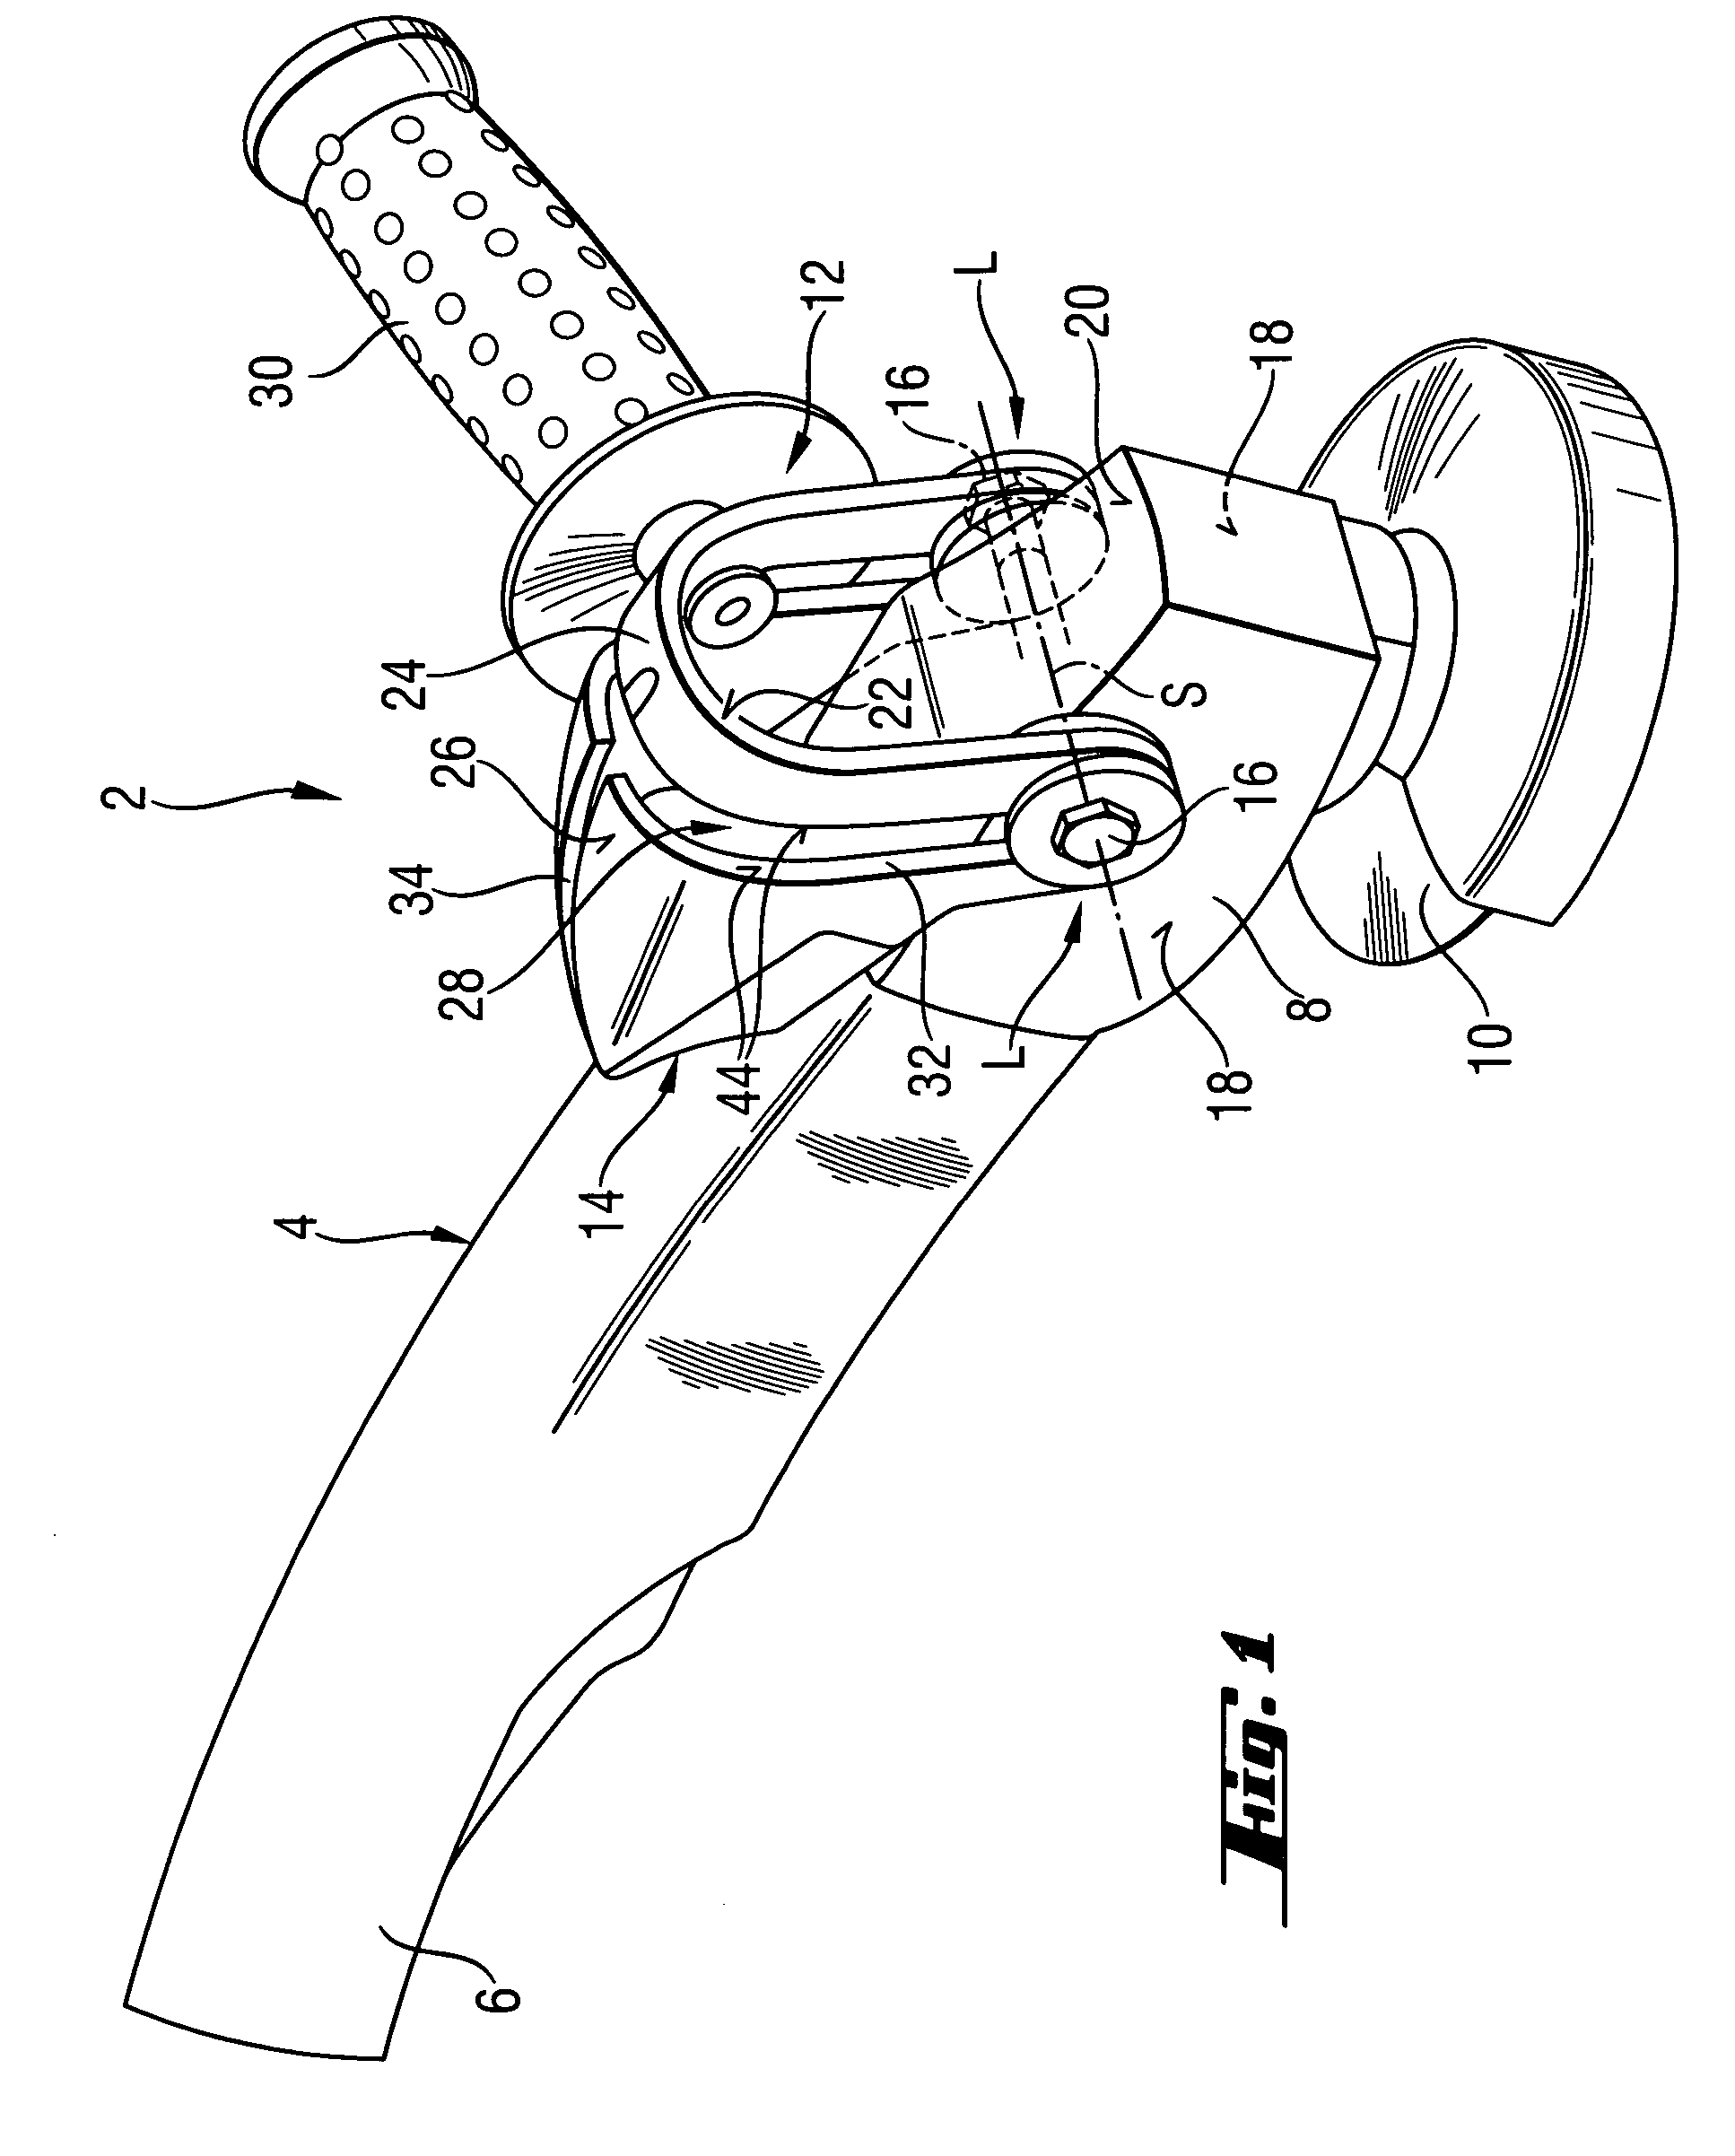 Hand-held power tool with an auxiliary handle